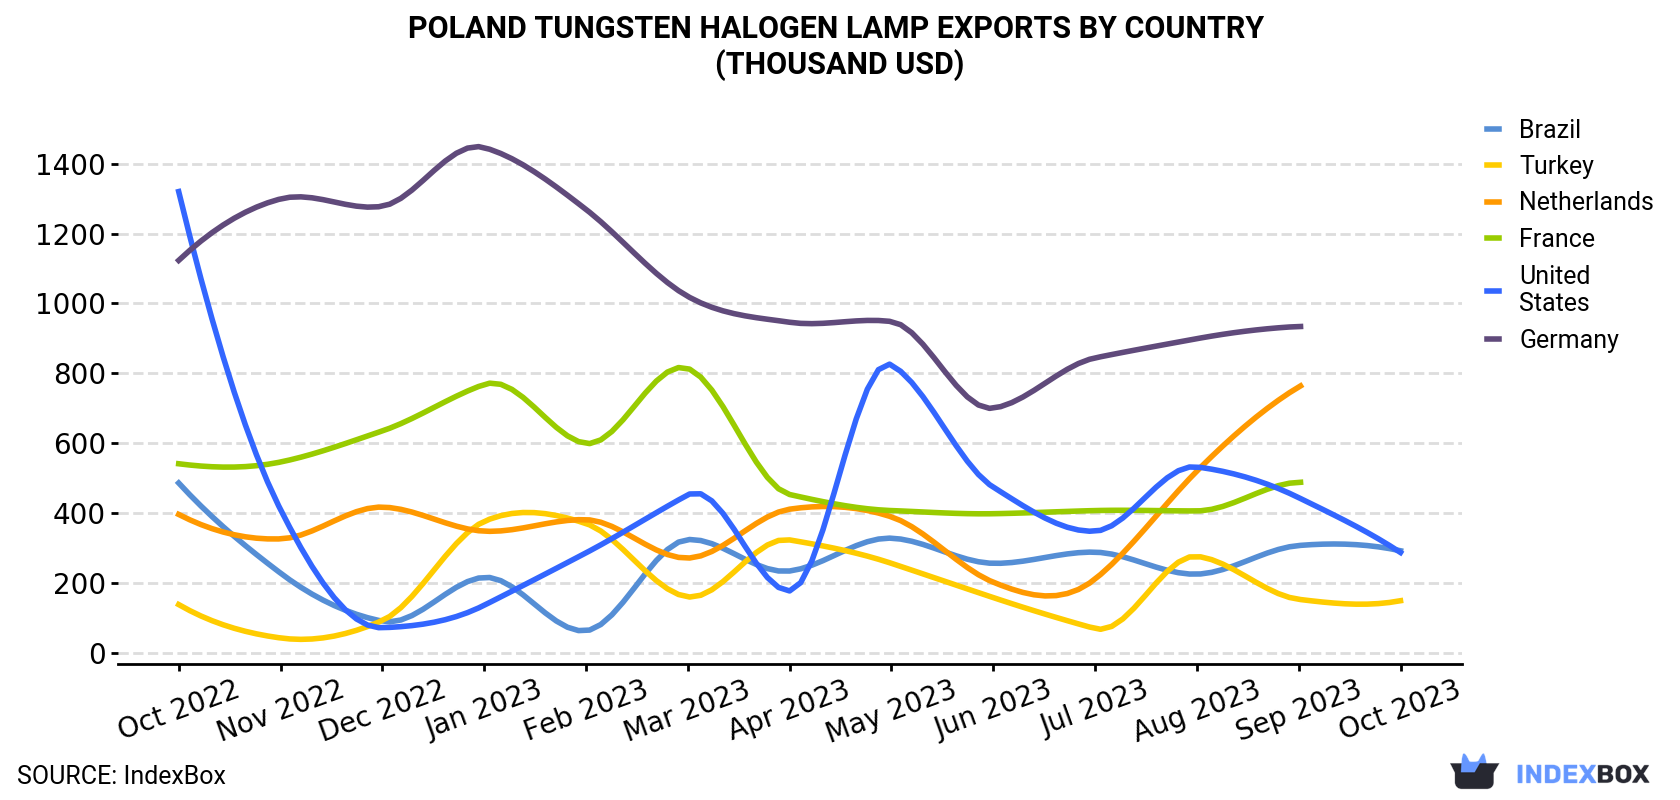 Poland Tungsten Halogen Lamp Exports By Country (Thousand USD)